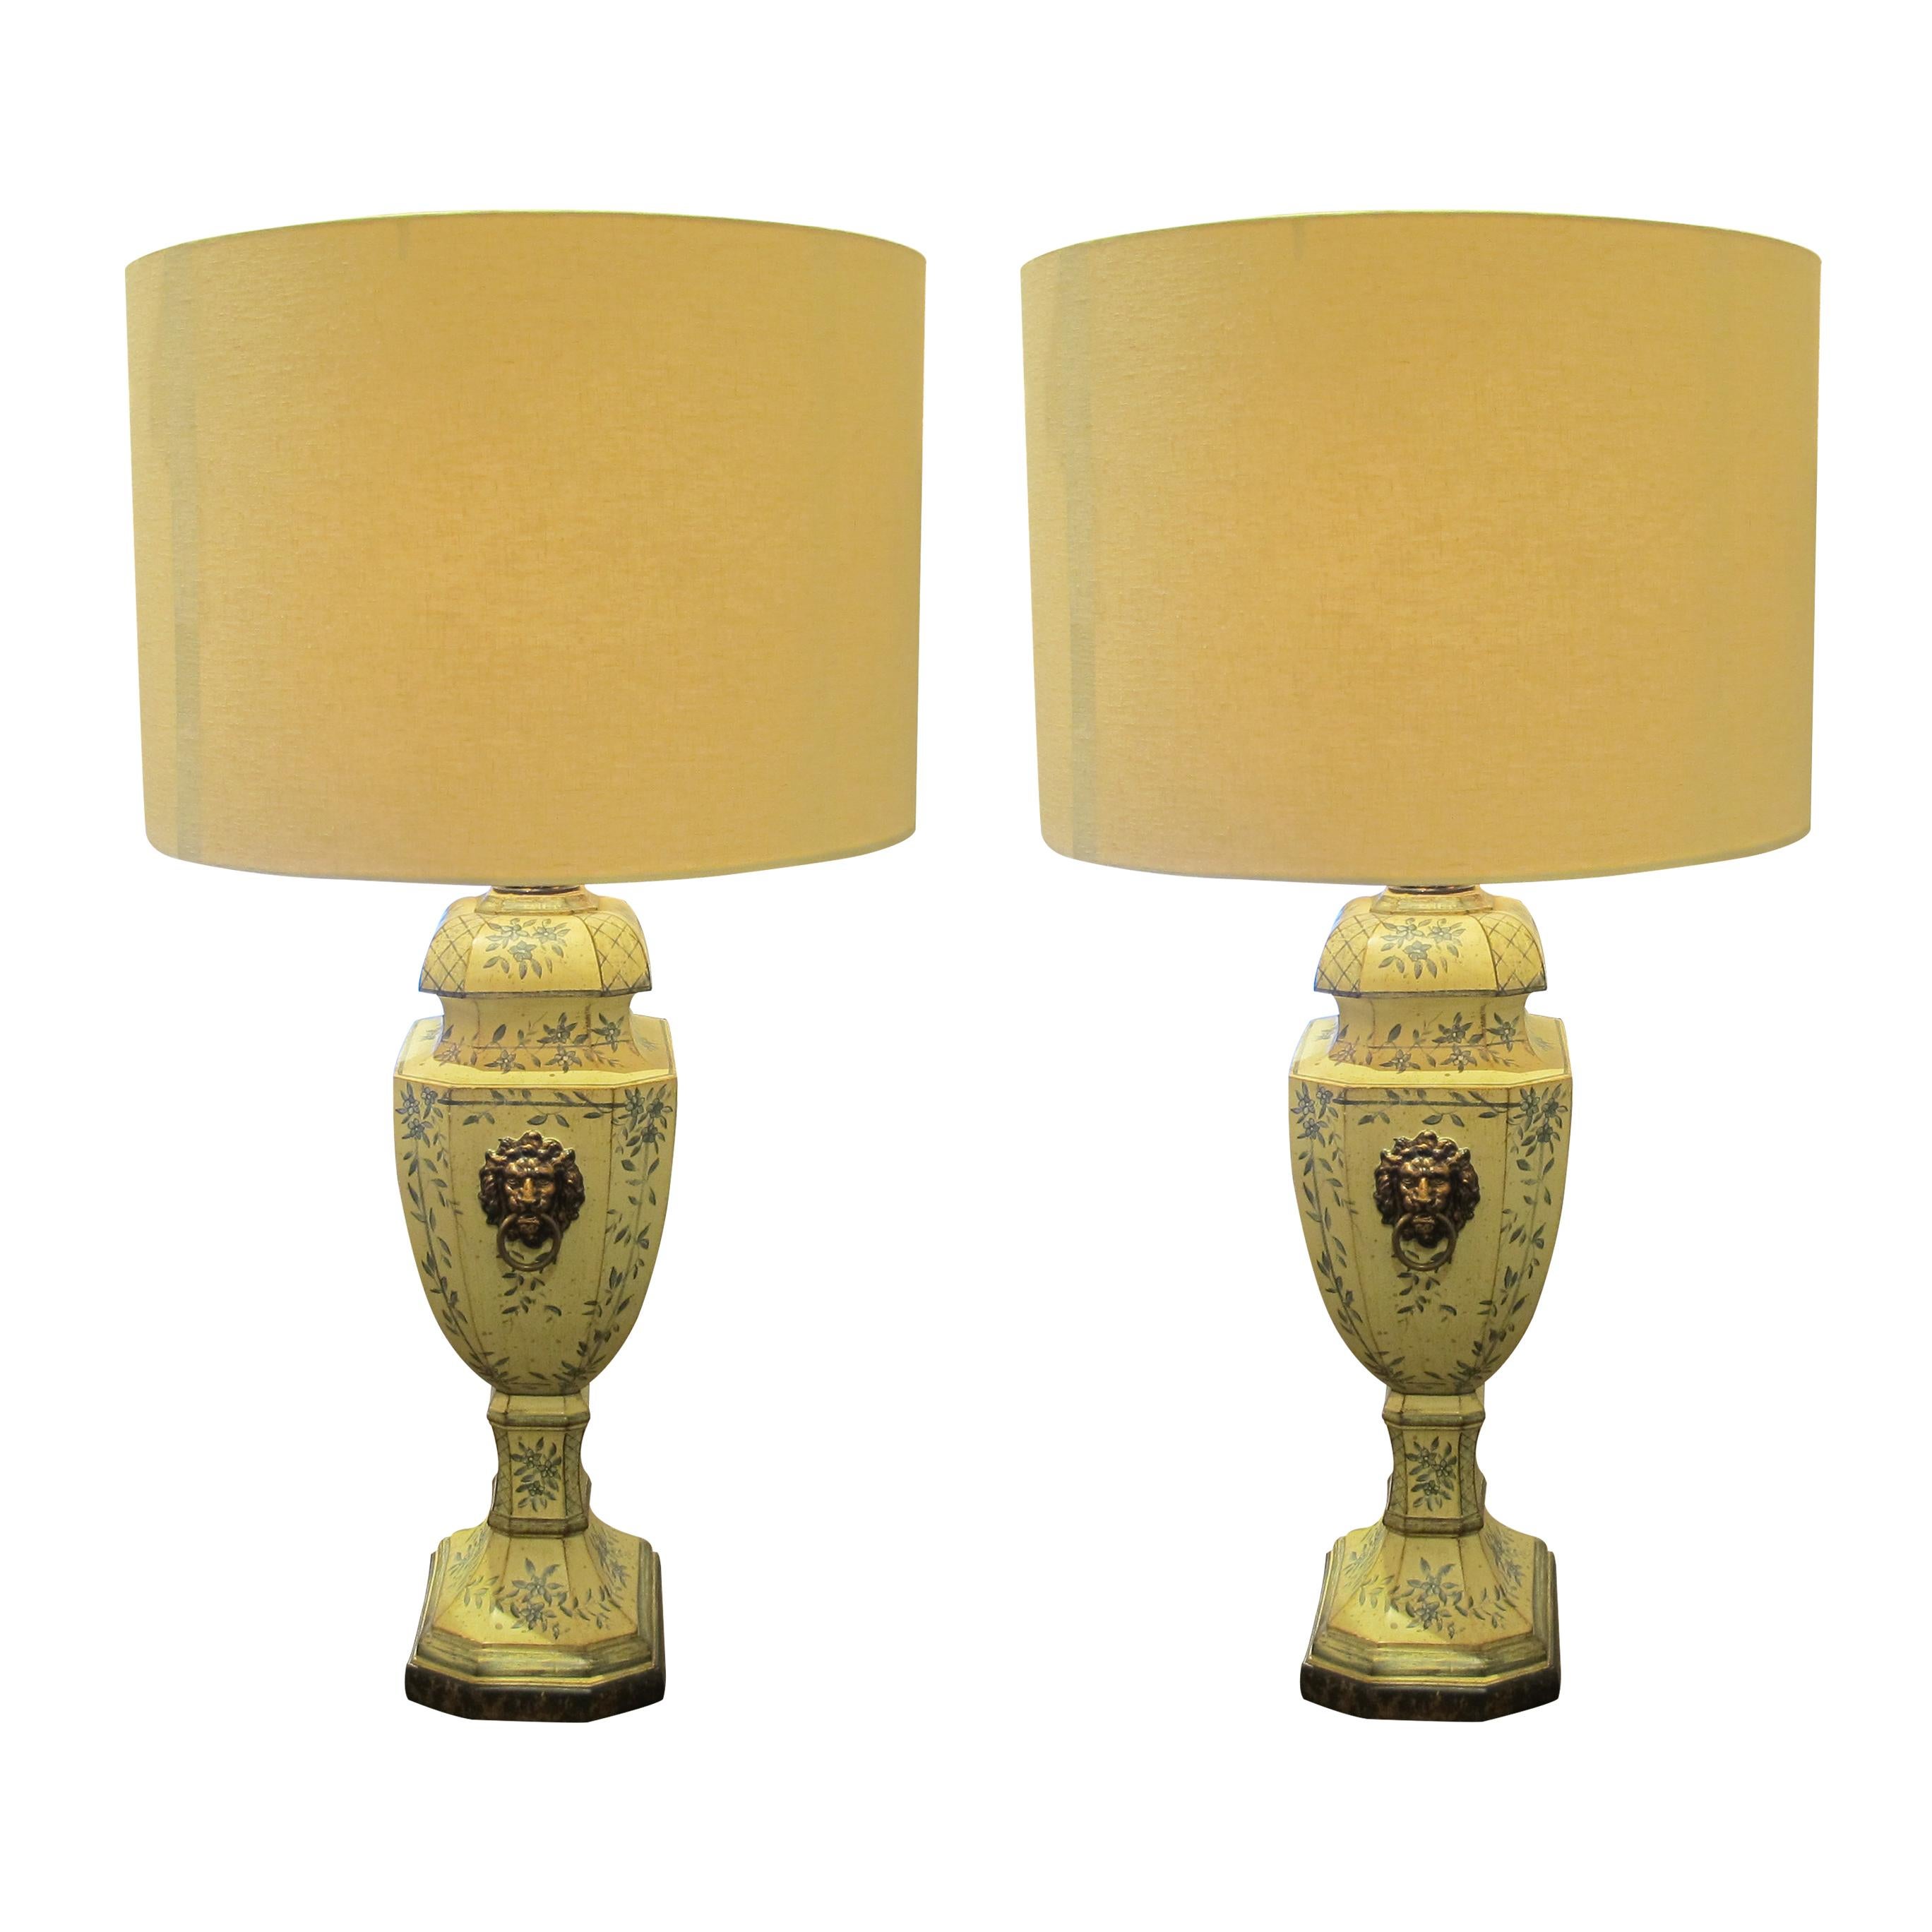 Pair of elegant mid-century French hand-painted toleware table lamps with bronze coloured lion heads with a ring on either side of the lamps. The lamps have a pale cream patina and are decorated with light blue hand-painted leaves, flowers, and